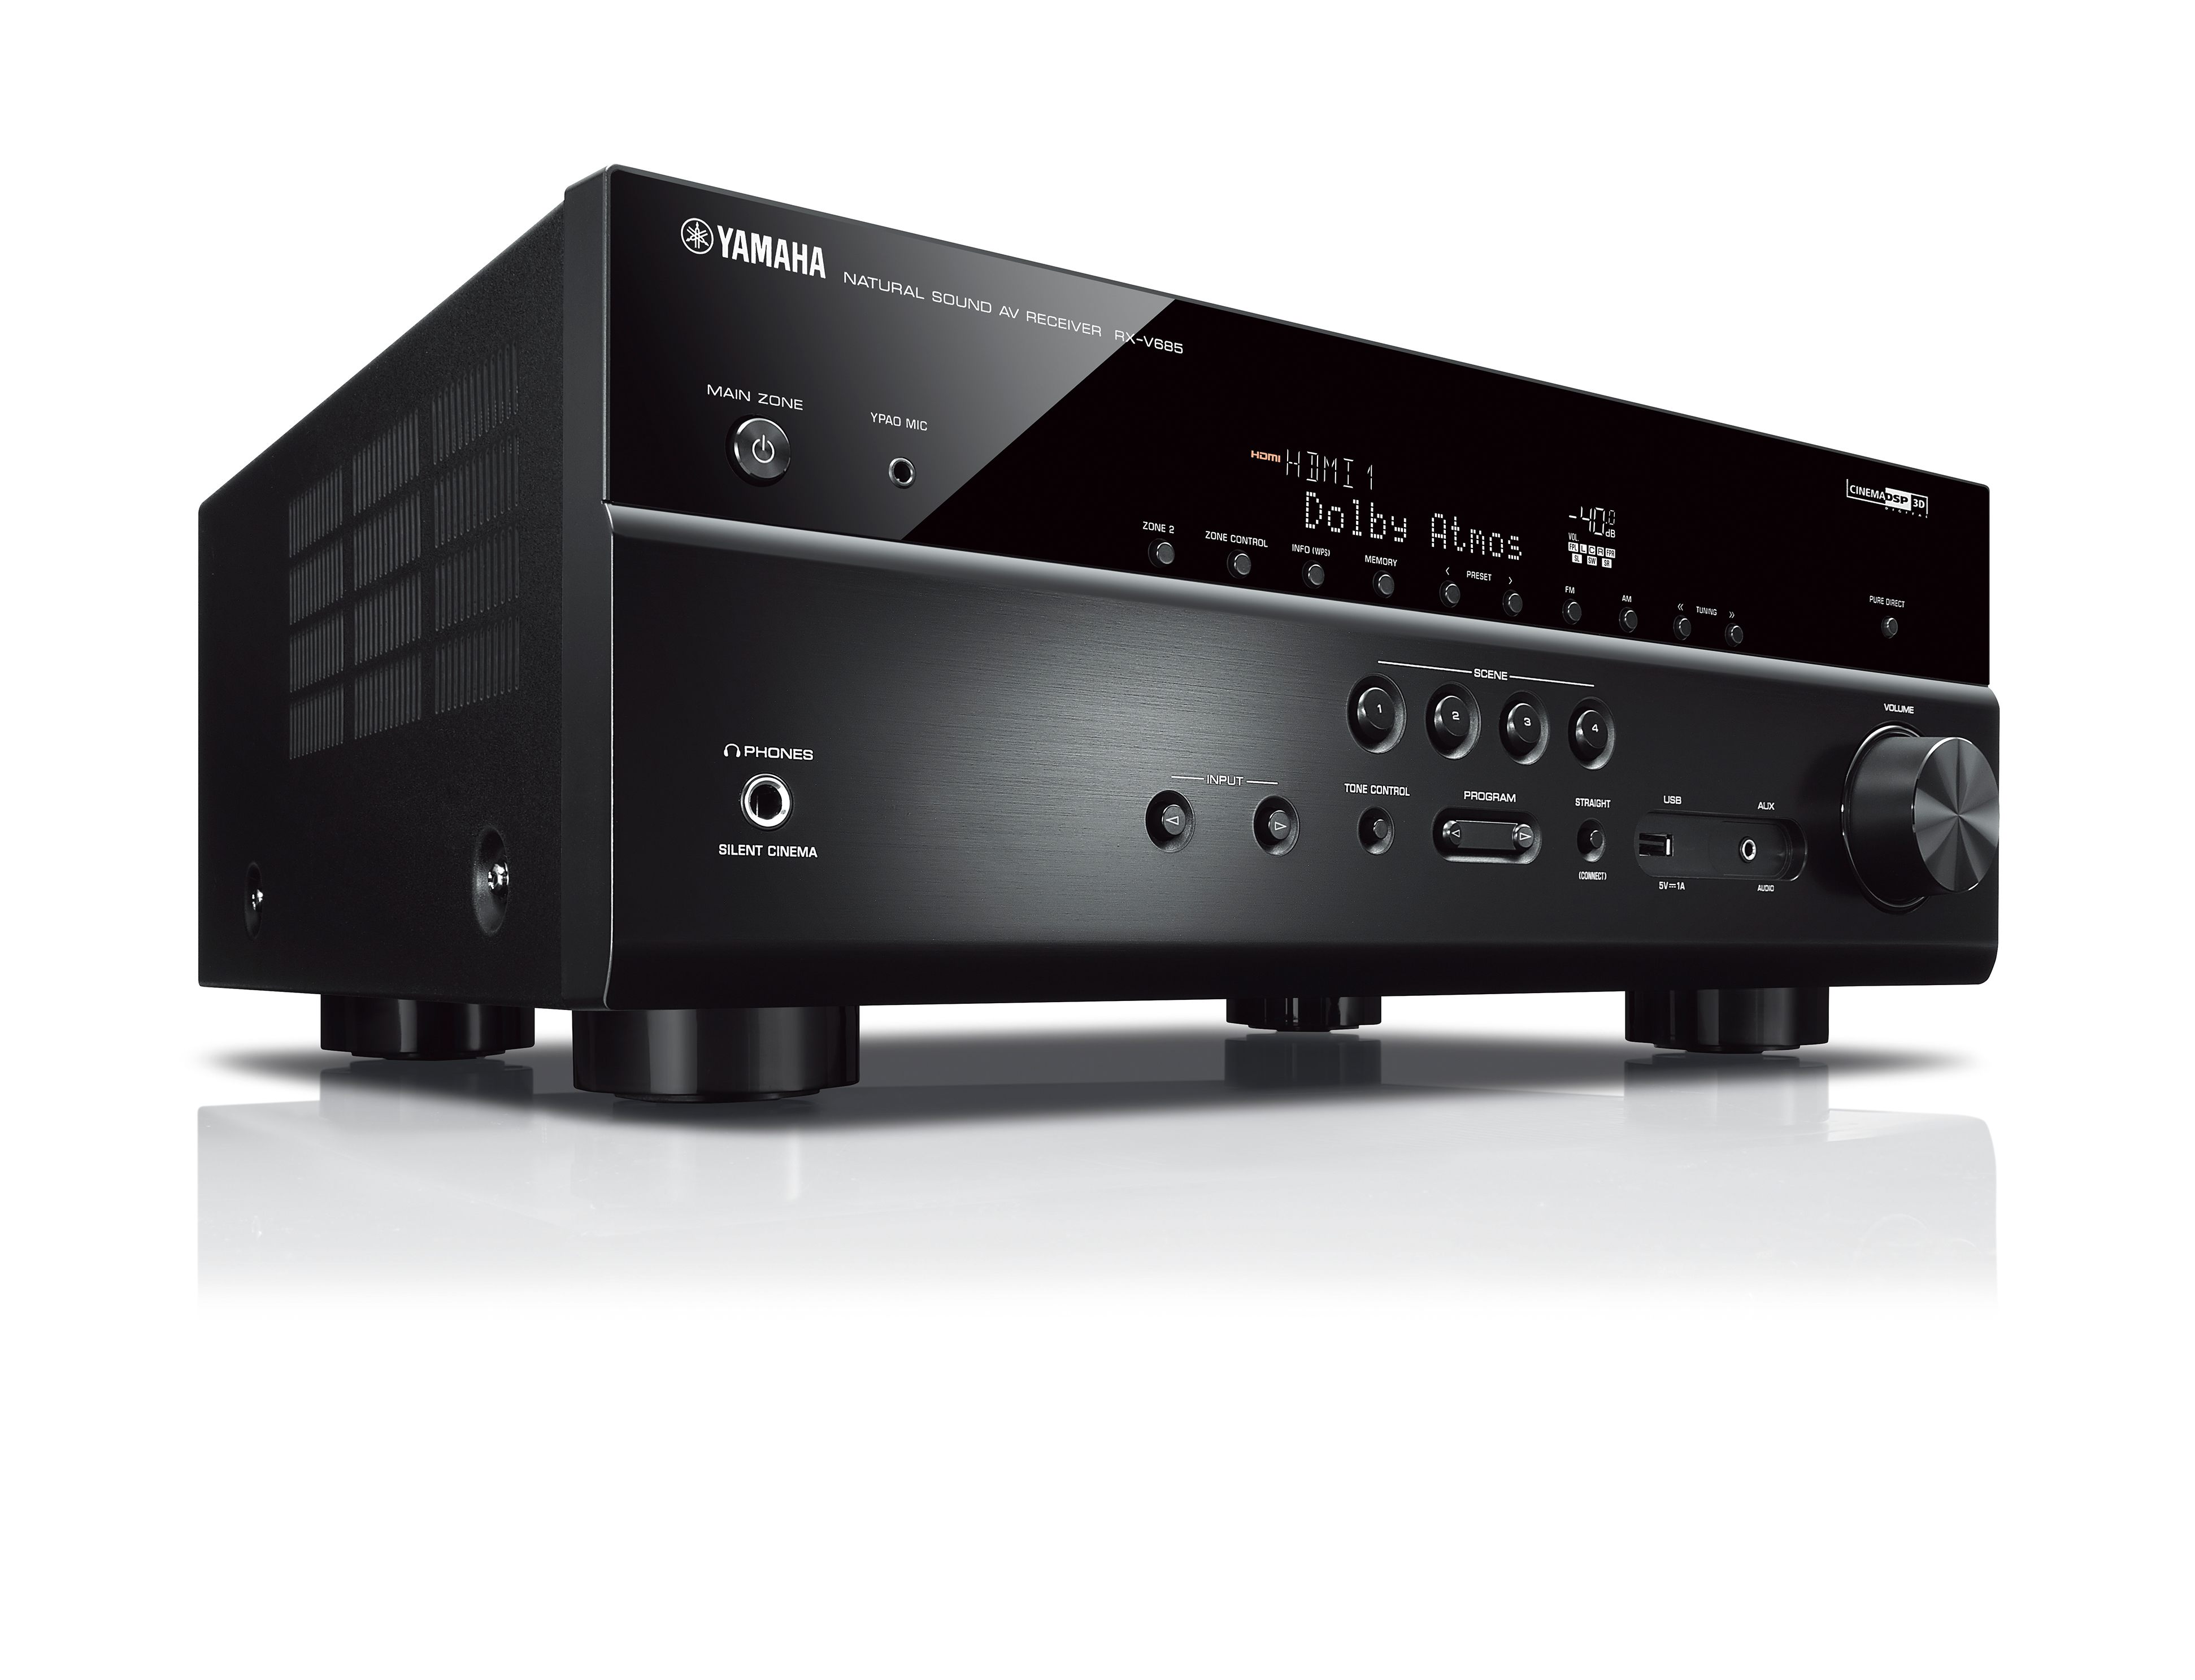 land luchthaven browser RX-V685 - Overview - AV Receivers - Audio & Visual - Products - Yamaha USA